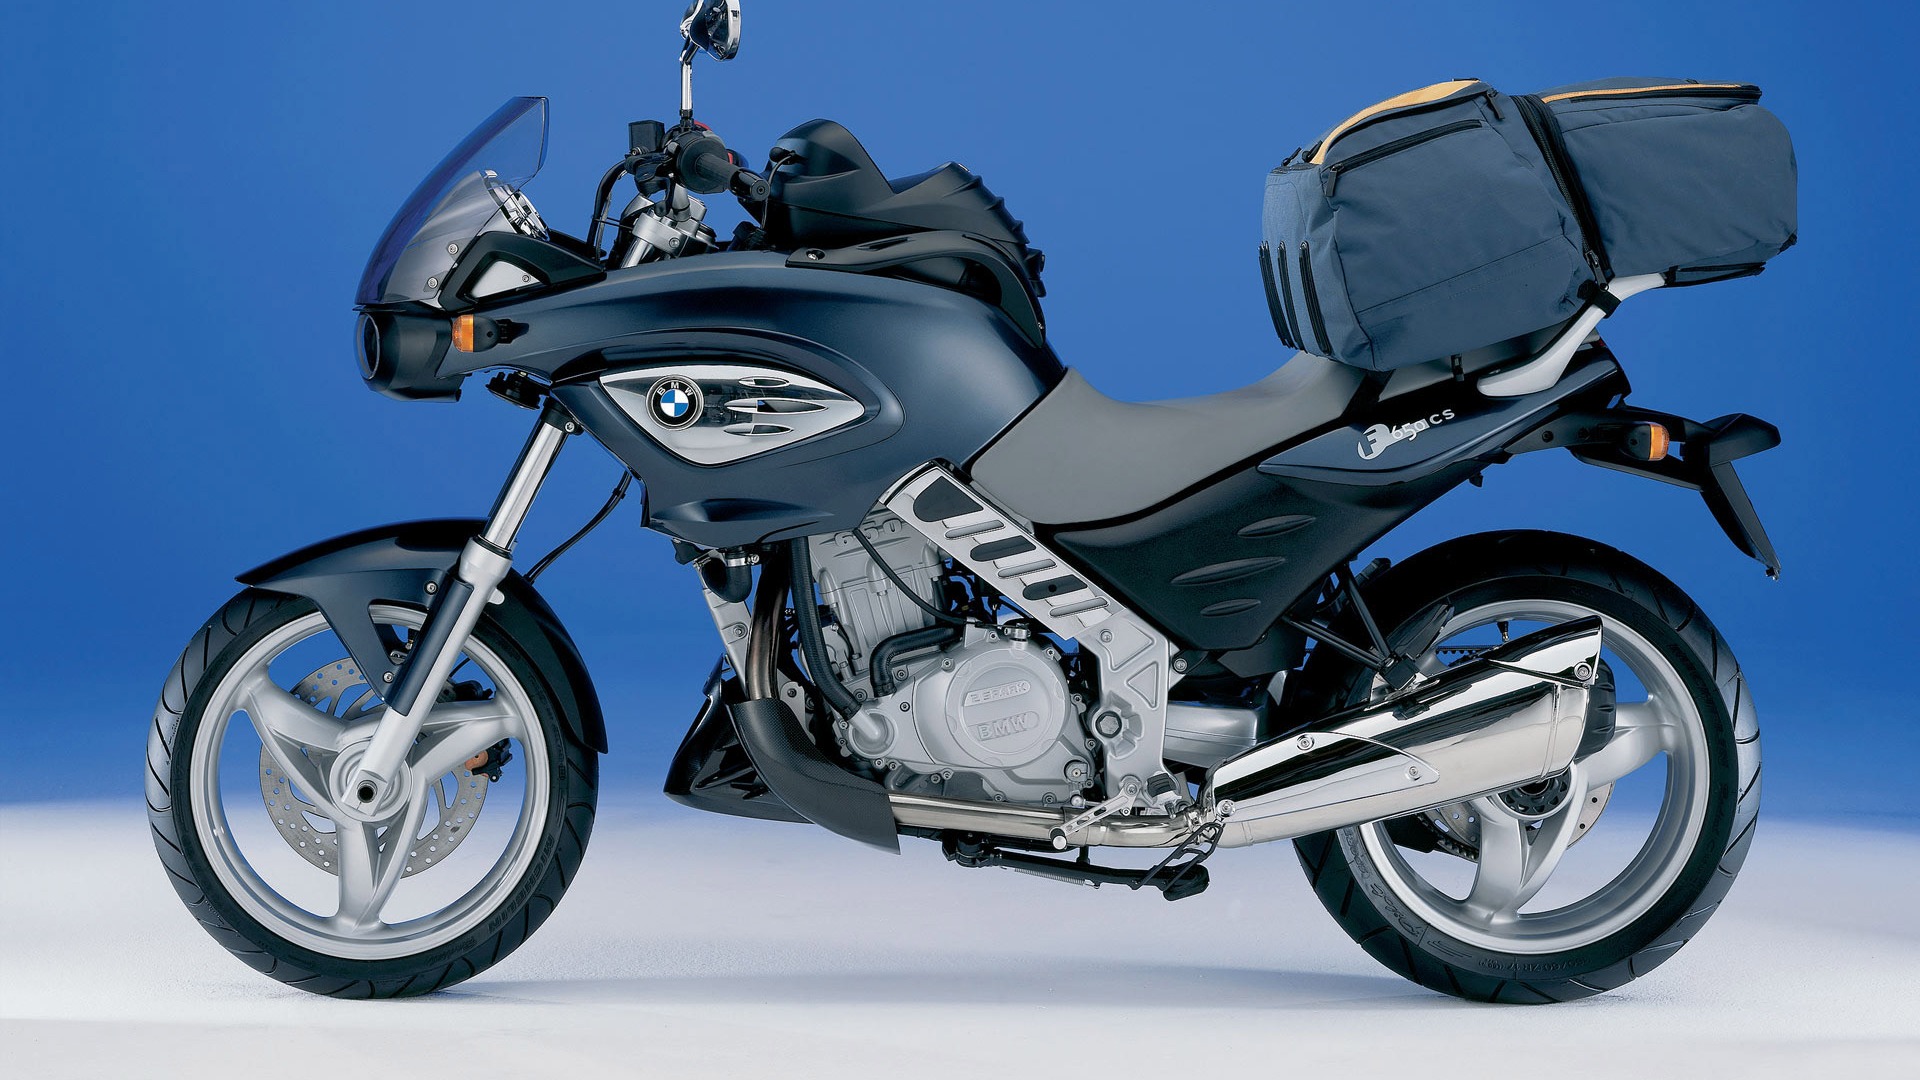 BMW motorcycle wallpapers (3) #4 - 1920x1080